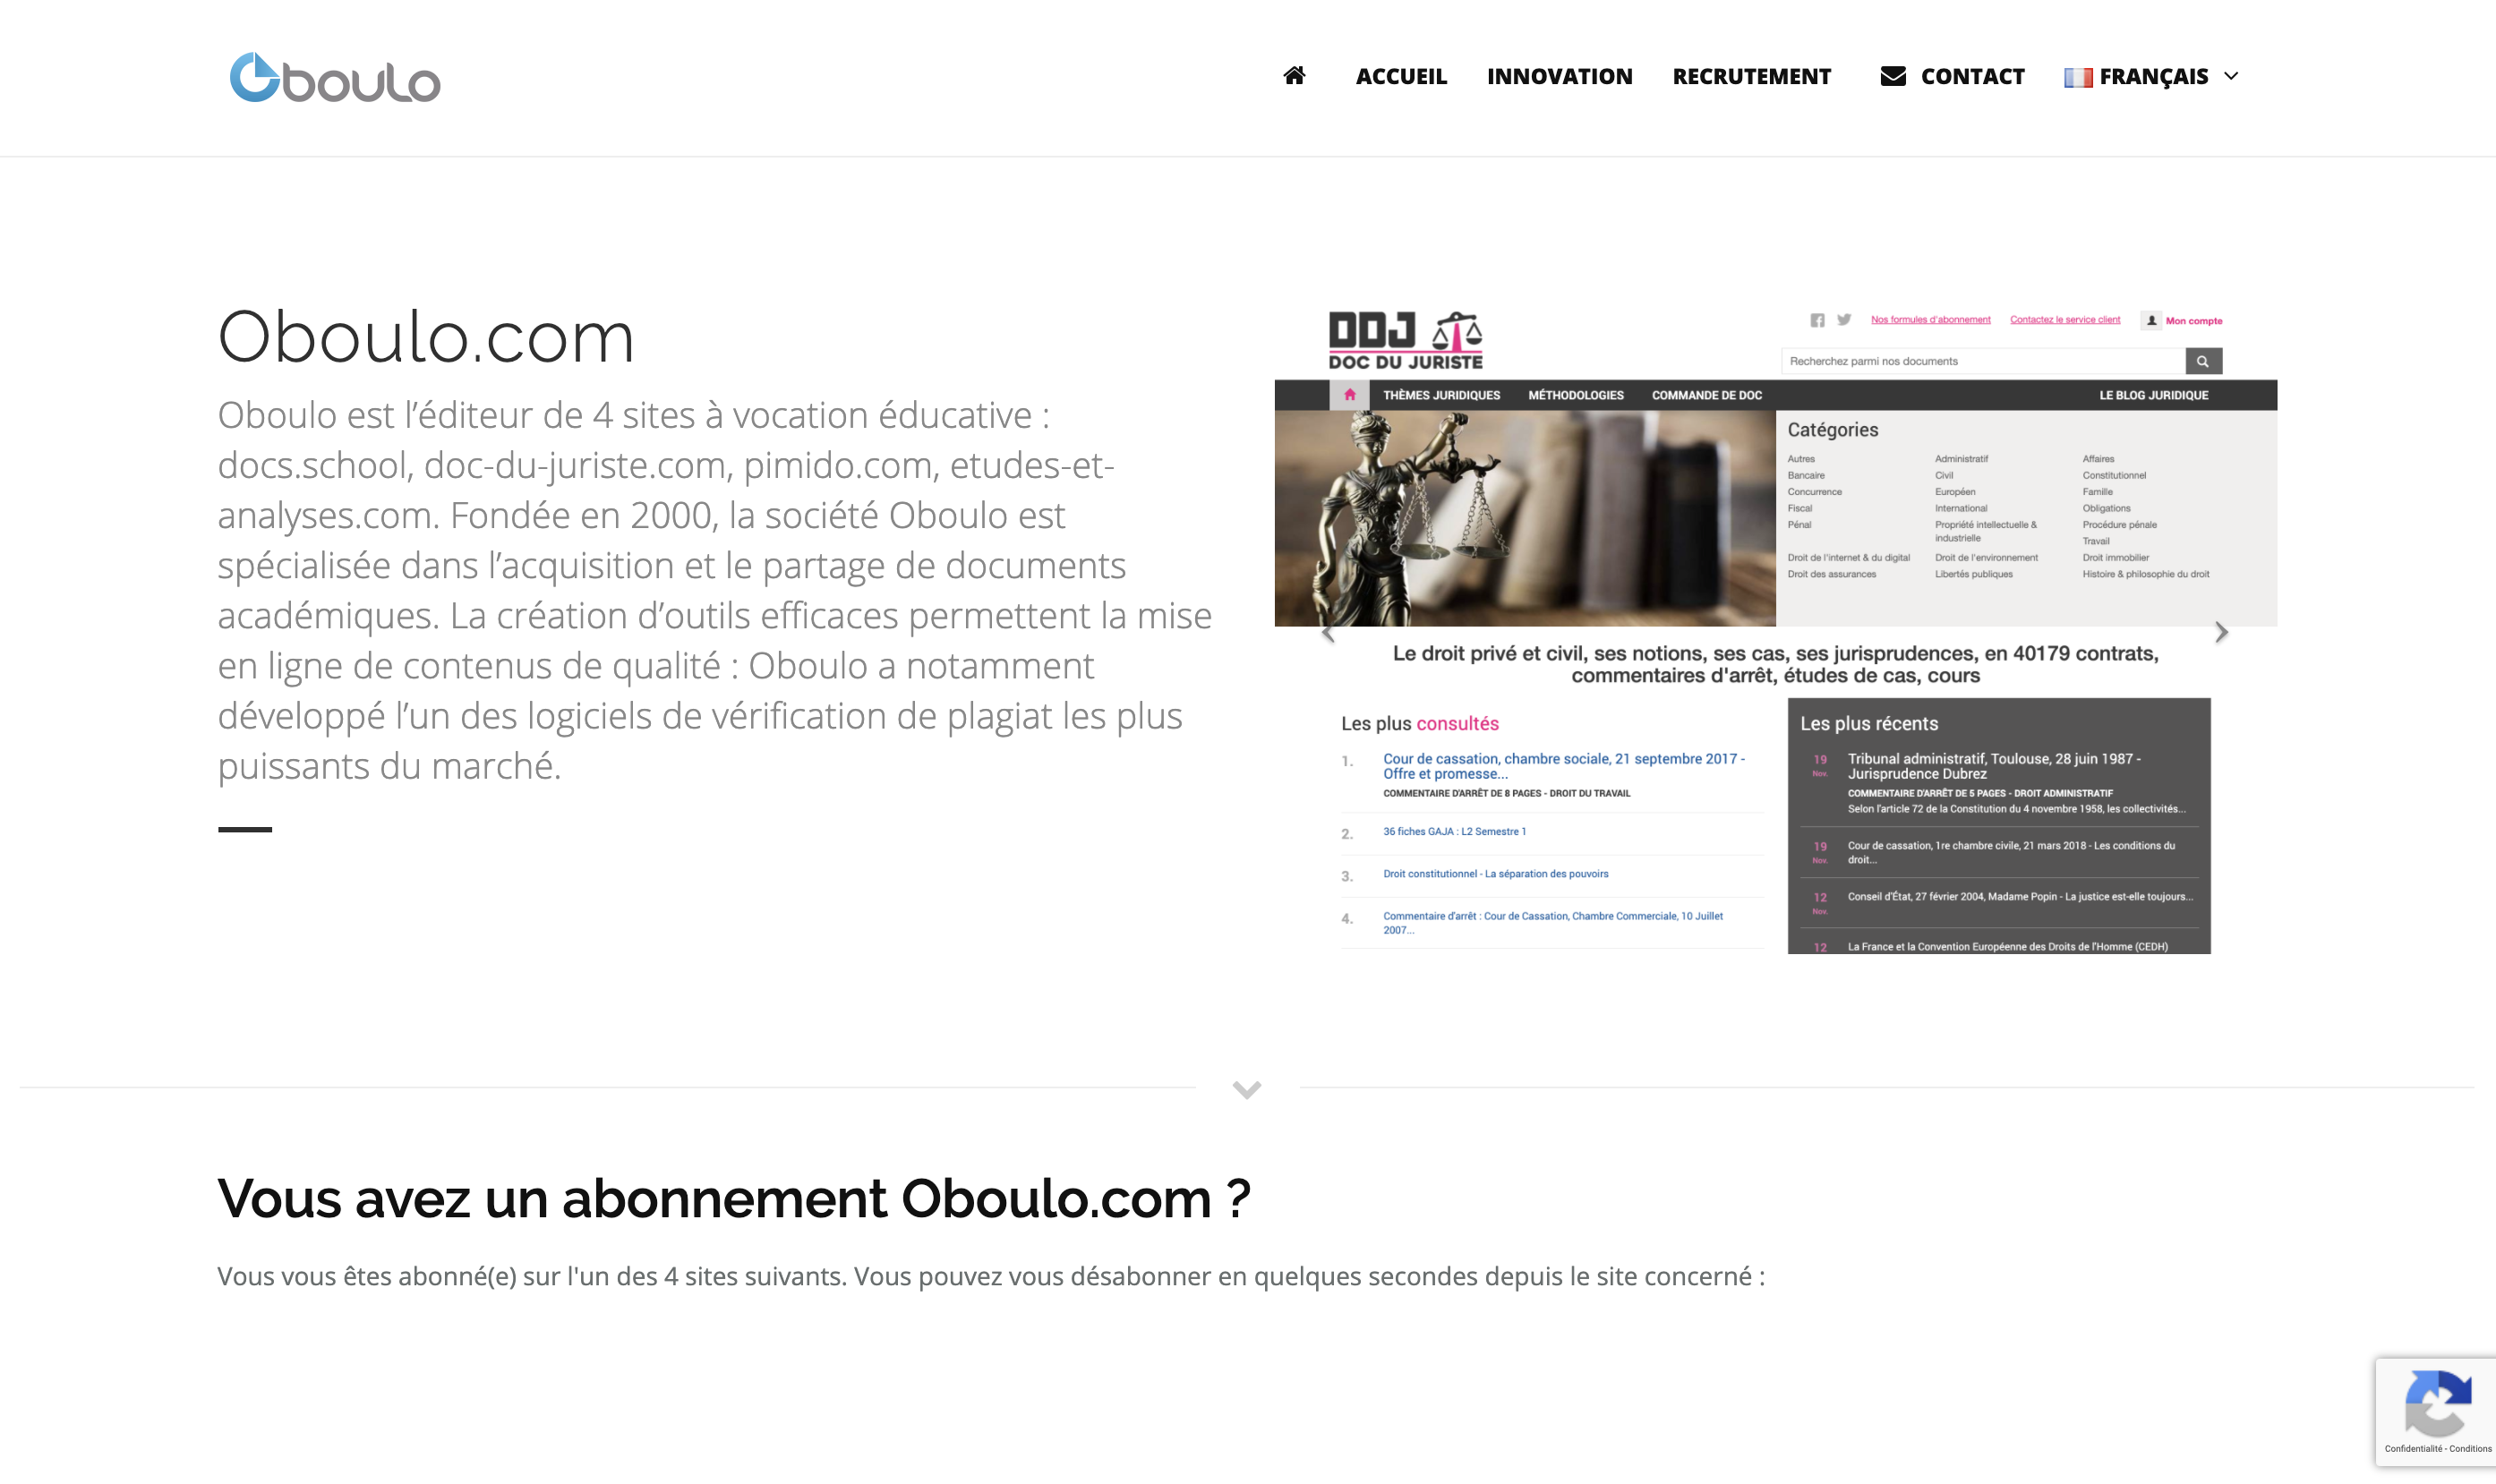 Oboulo International needed a one page website